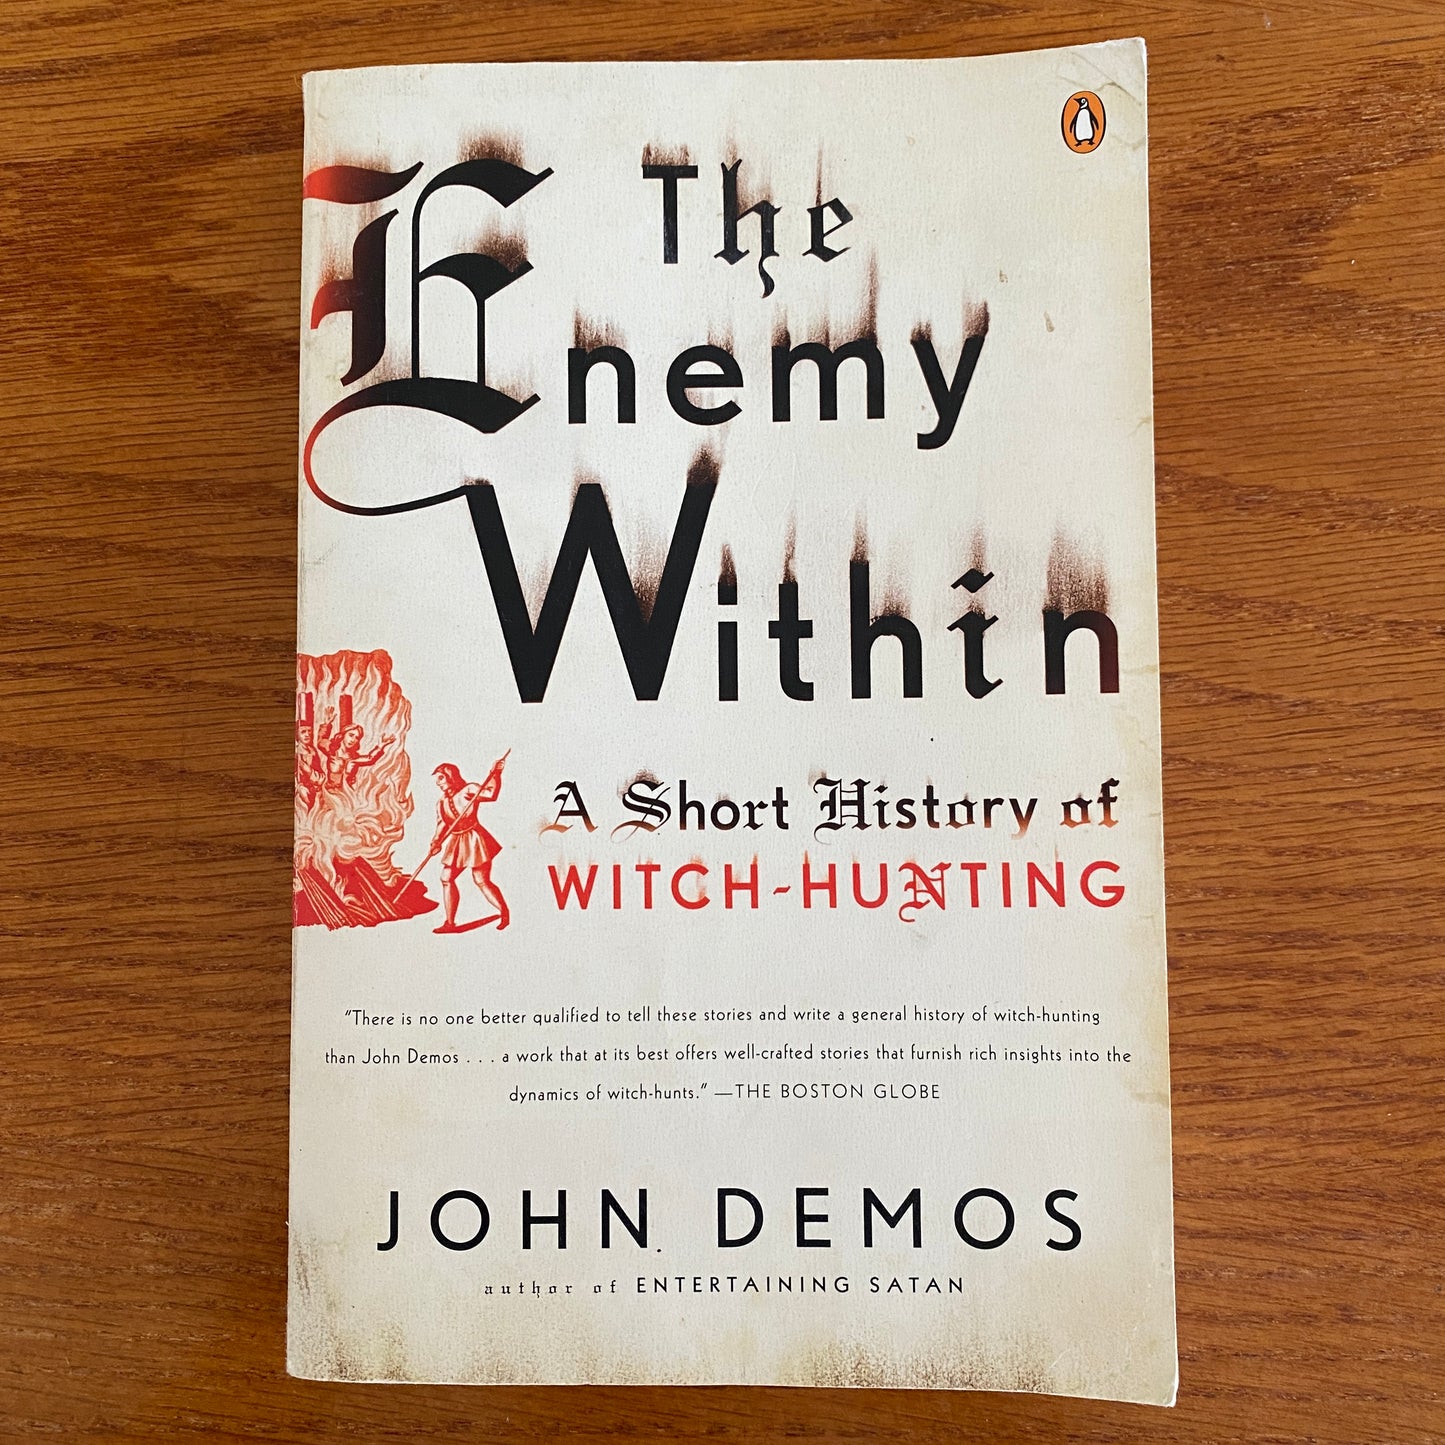 The Enemy Within: A Short History of Witch-hunting - John Demos